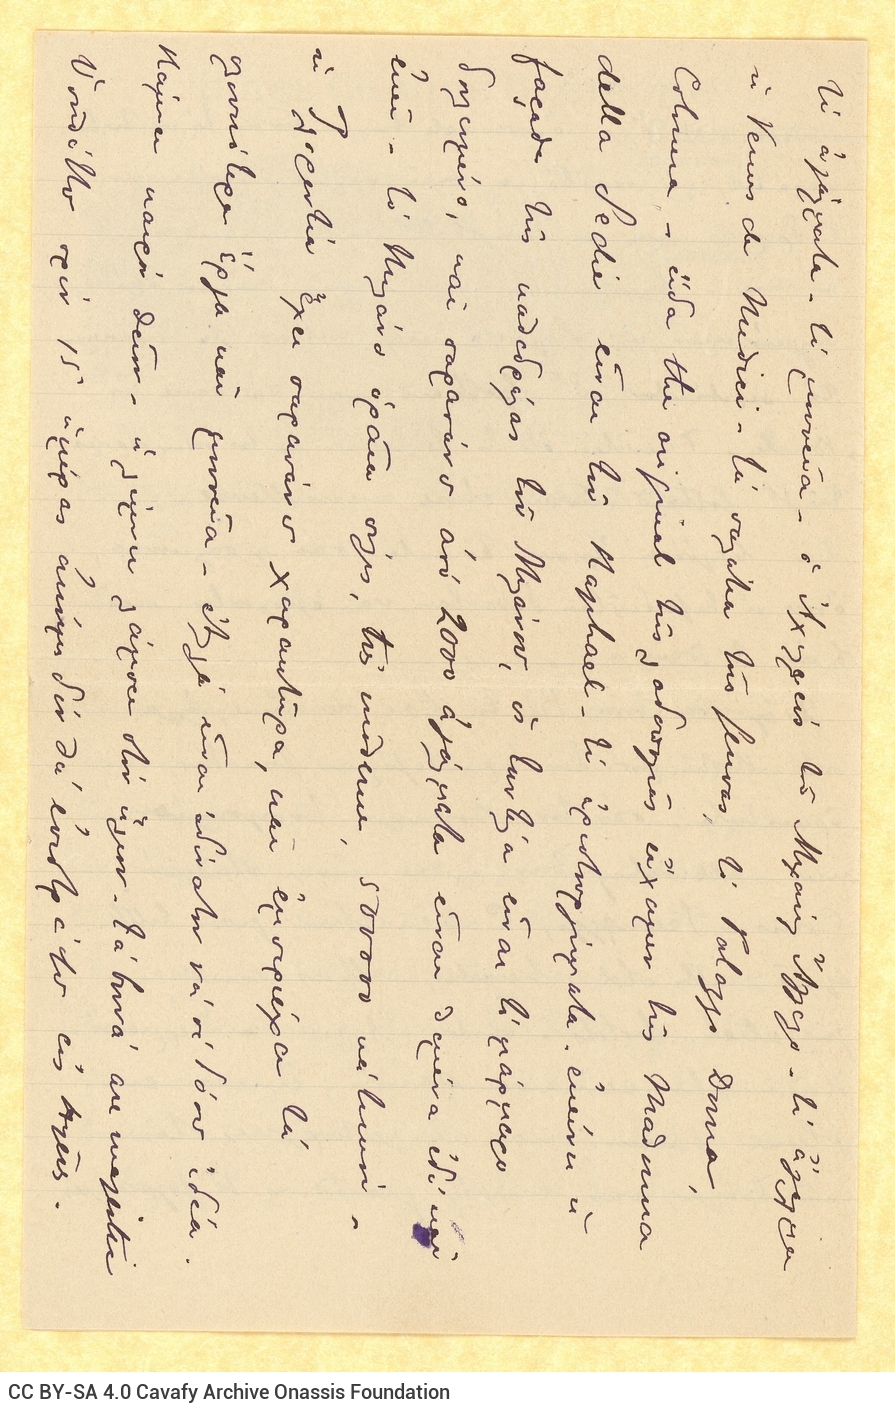 Handwritten letter by Paul Cavafy to C. P. Cavafy from Bellagio, Italy, according to the letterhead, on all sides of a bifoli